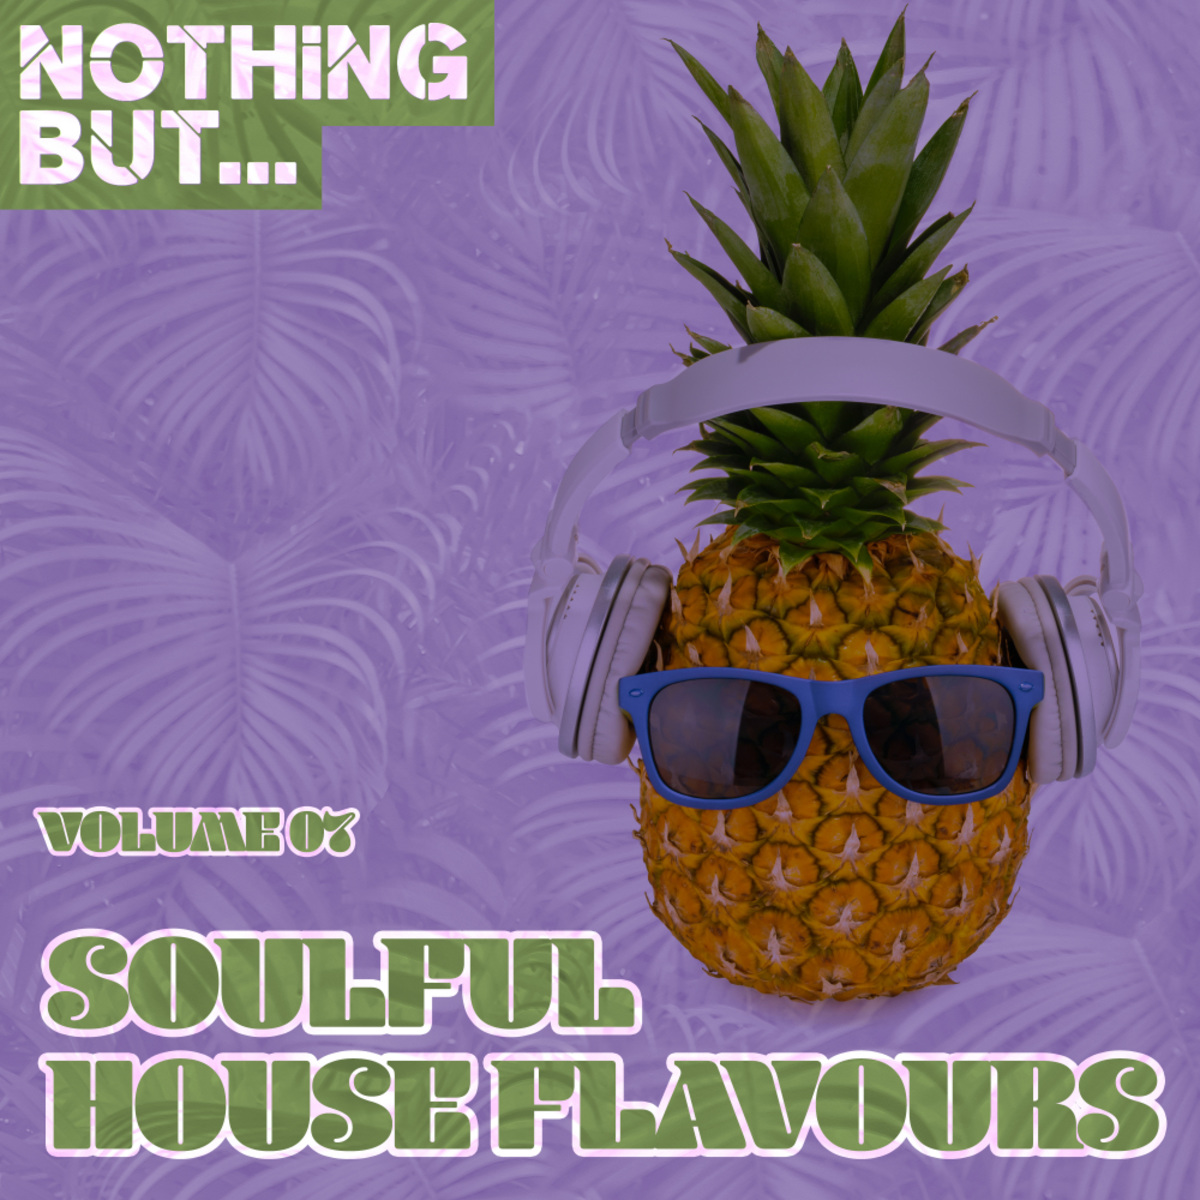 VA - Nothing But... Soulful House Flavours, Vol. 07 / Nothing But